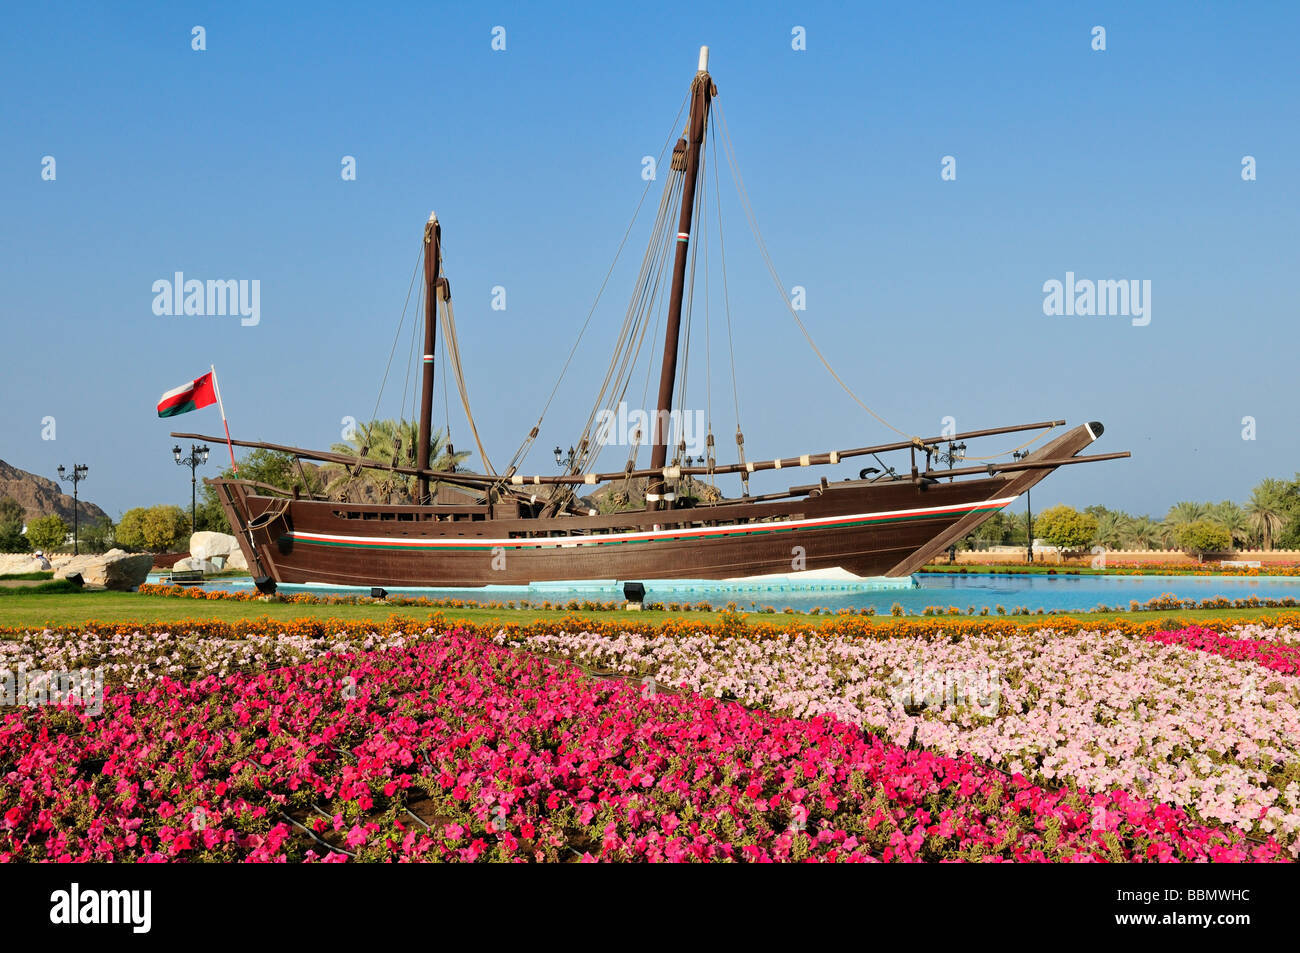 Renovated dhow Sohar at Al Bustan Roundabout, Muscat, Sultanate of Oman, Arabia, Middle East Stock Photo